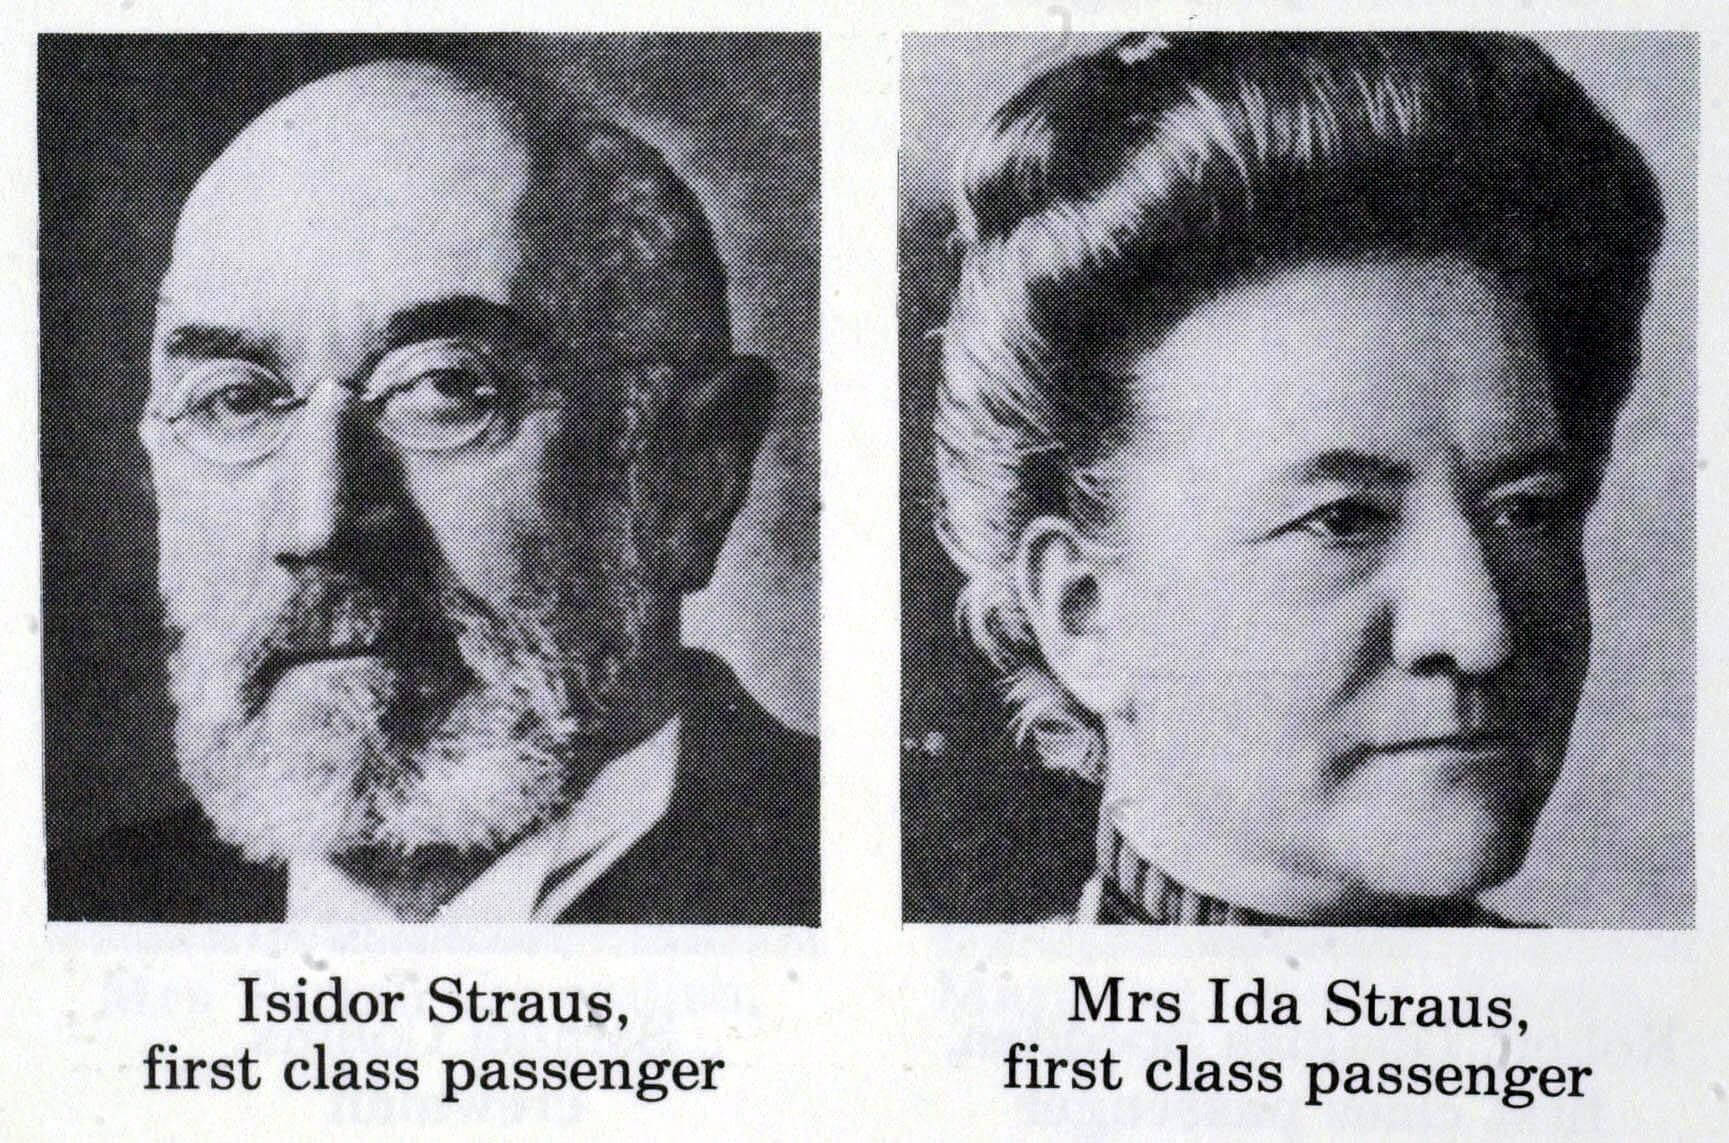 Isidor and Ida Straus who both died on the Titanic after Ida refused to leave her husband behind.